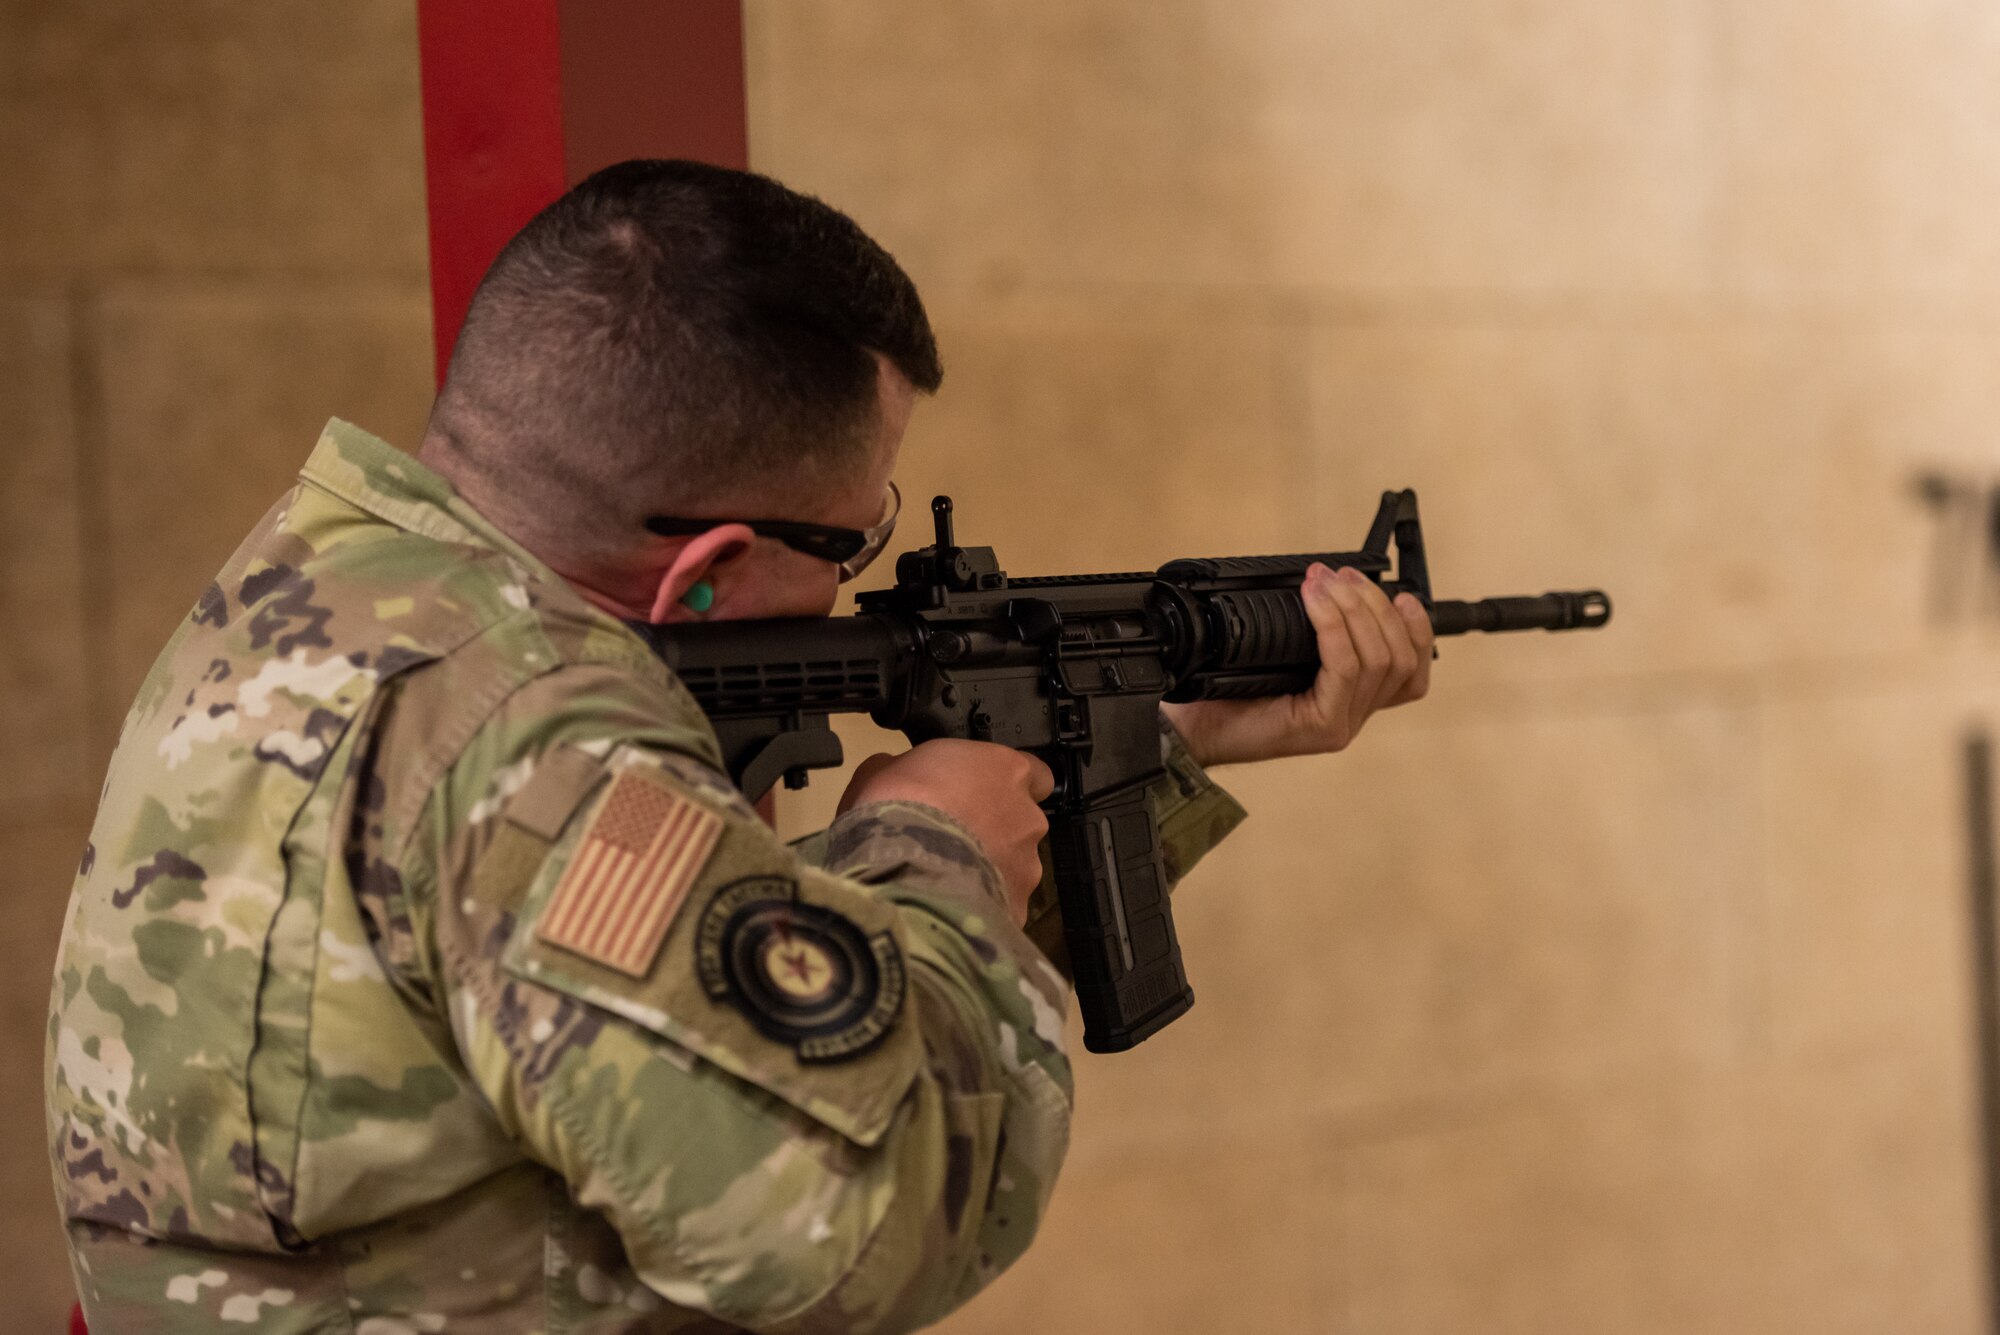 Staff Sgt. William Marshall, 51st Logistics Readiness Squadron fuels lab supervisor, fires during the M4 rifle portion of the excellence in competition event